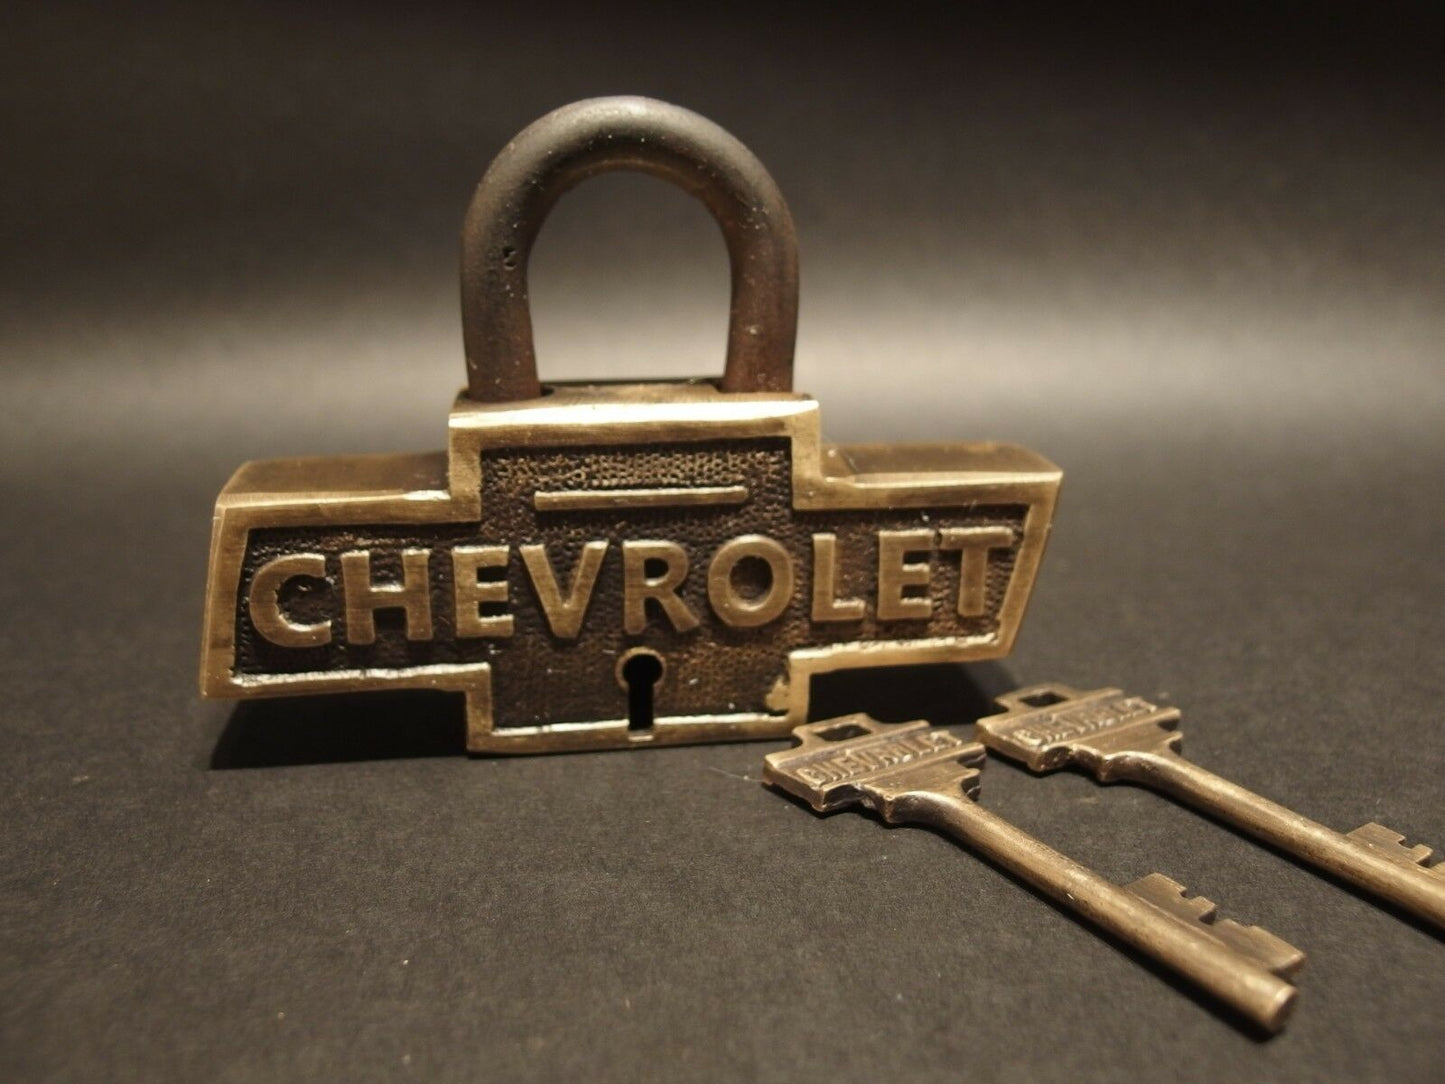 Antique Vintage Style Brass & Iron Trunk Chest Box Chevrolet Chevy Lock Padlock - Early Home Decor